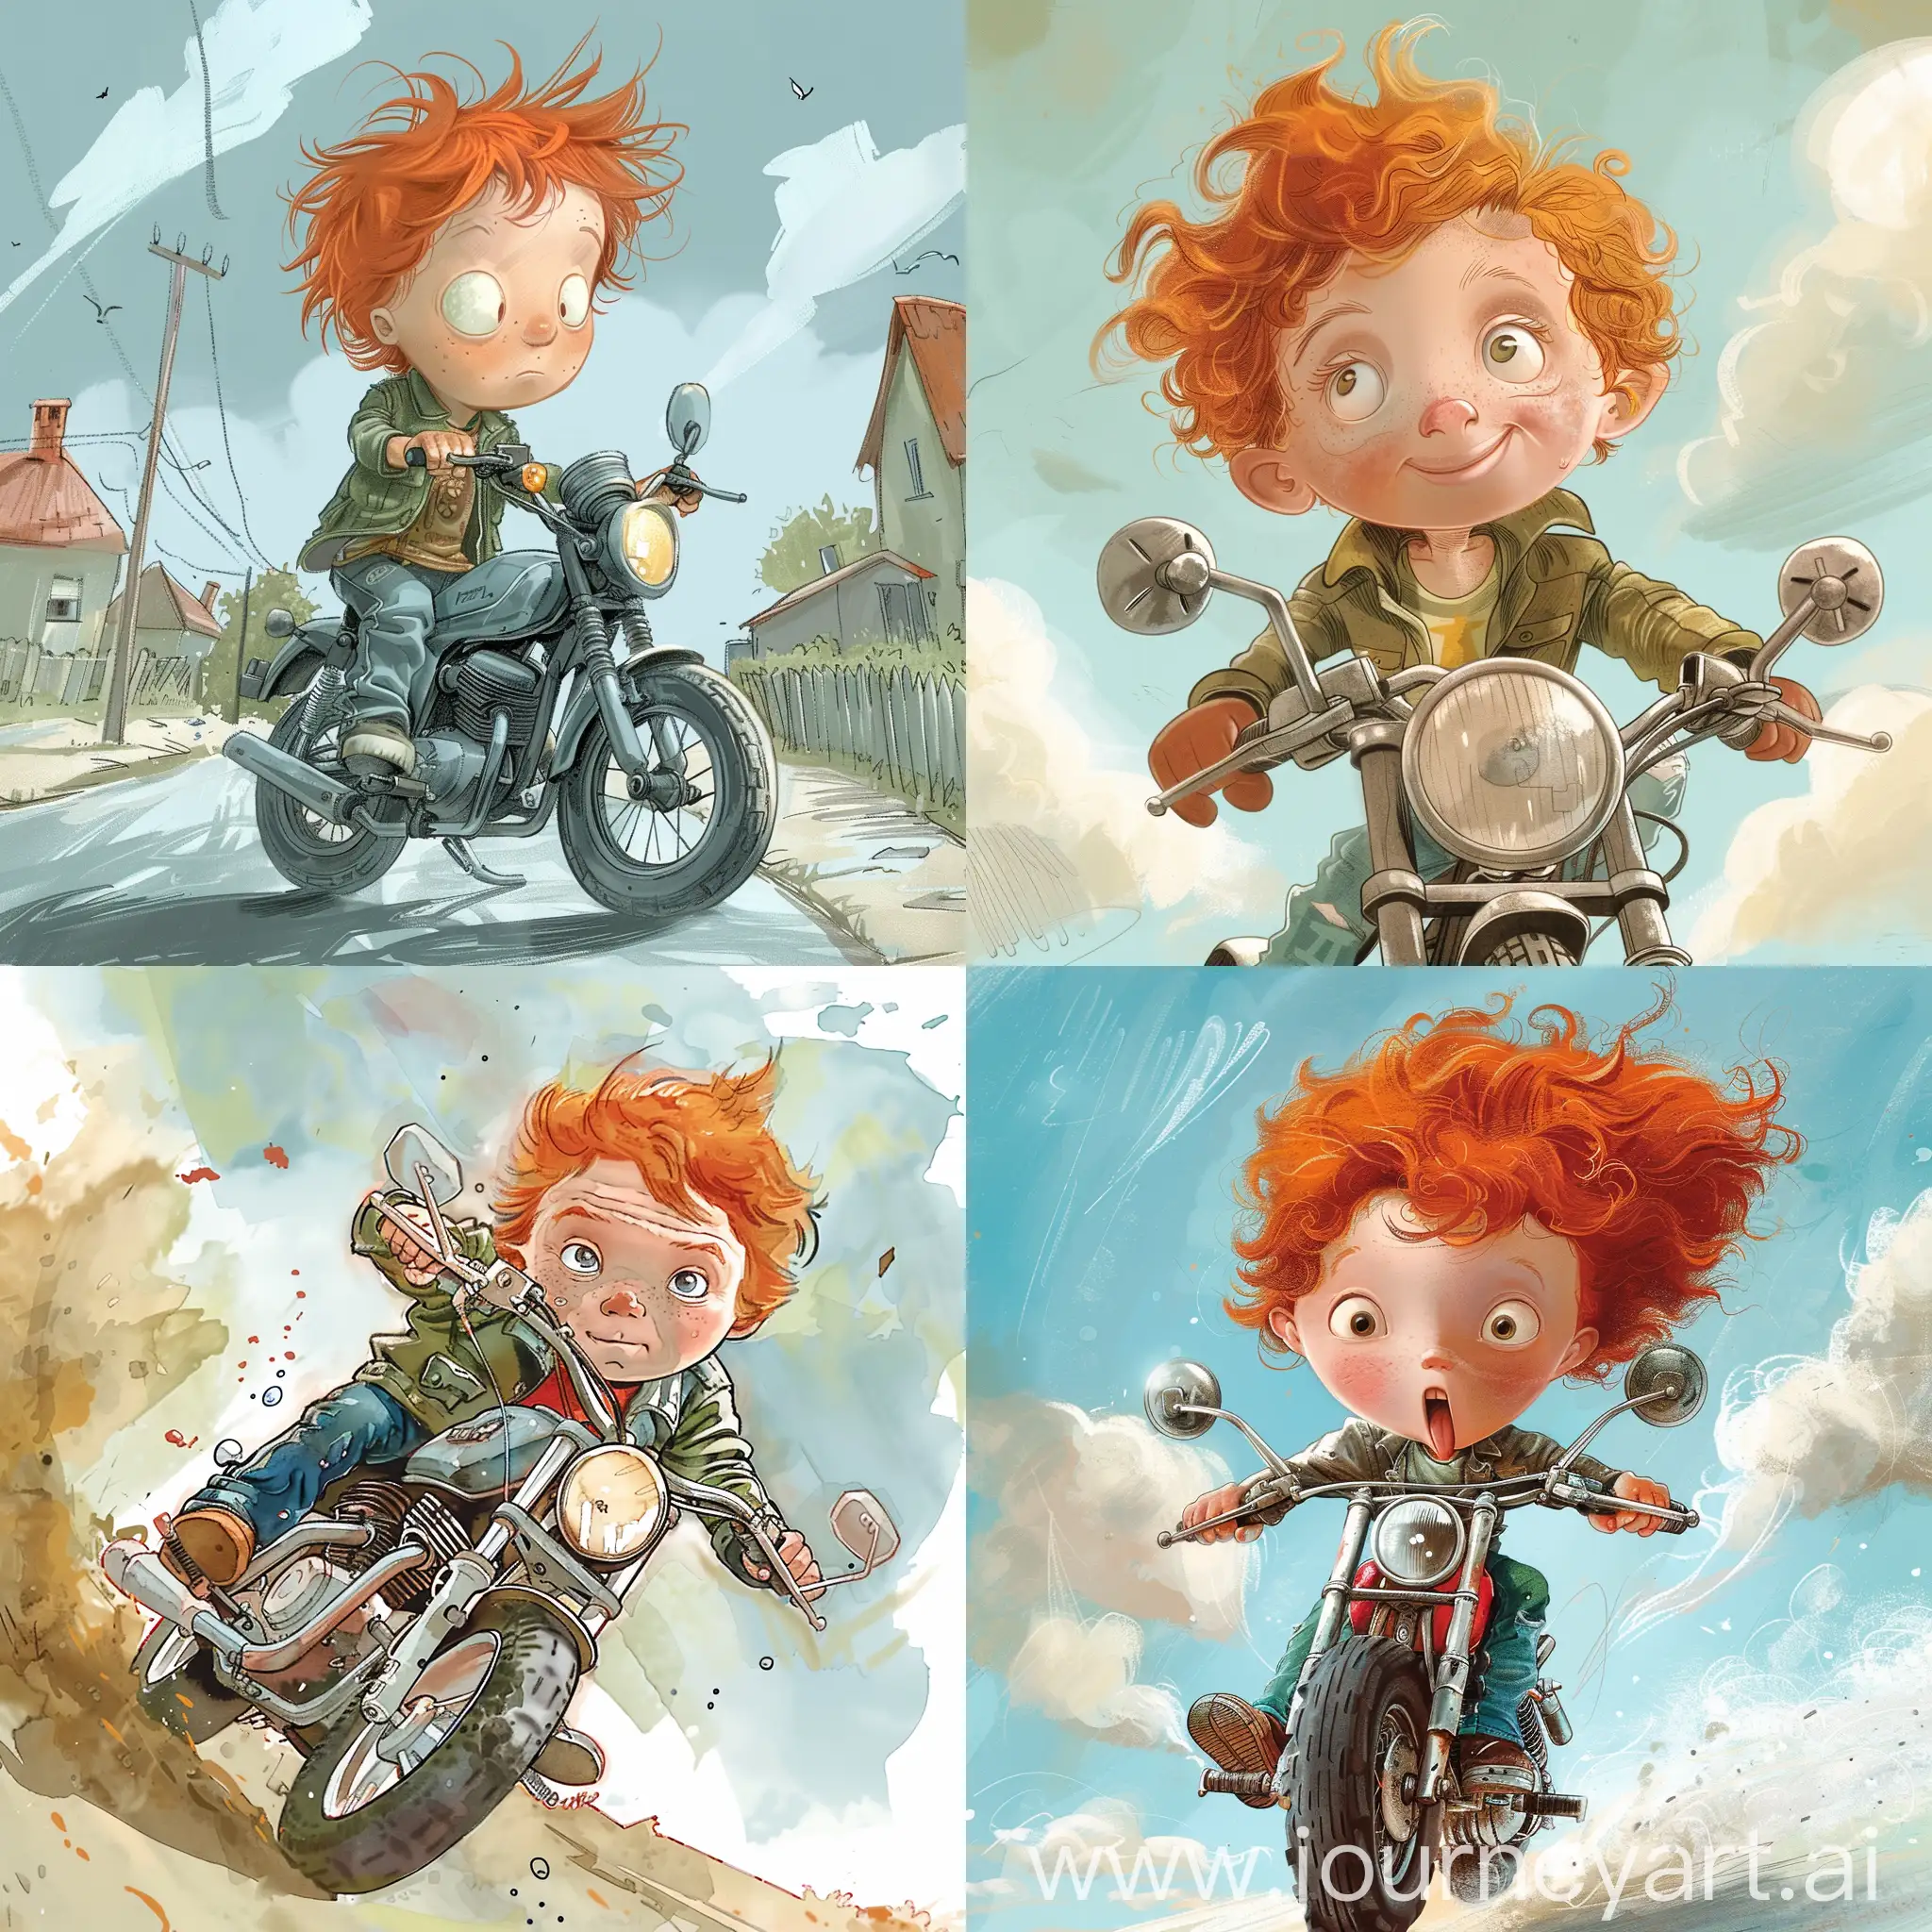 A 5 year old boy with red hair on a motorcycle, in a childrens book illustration style